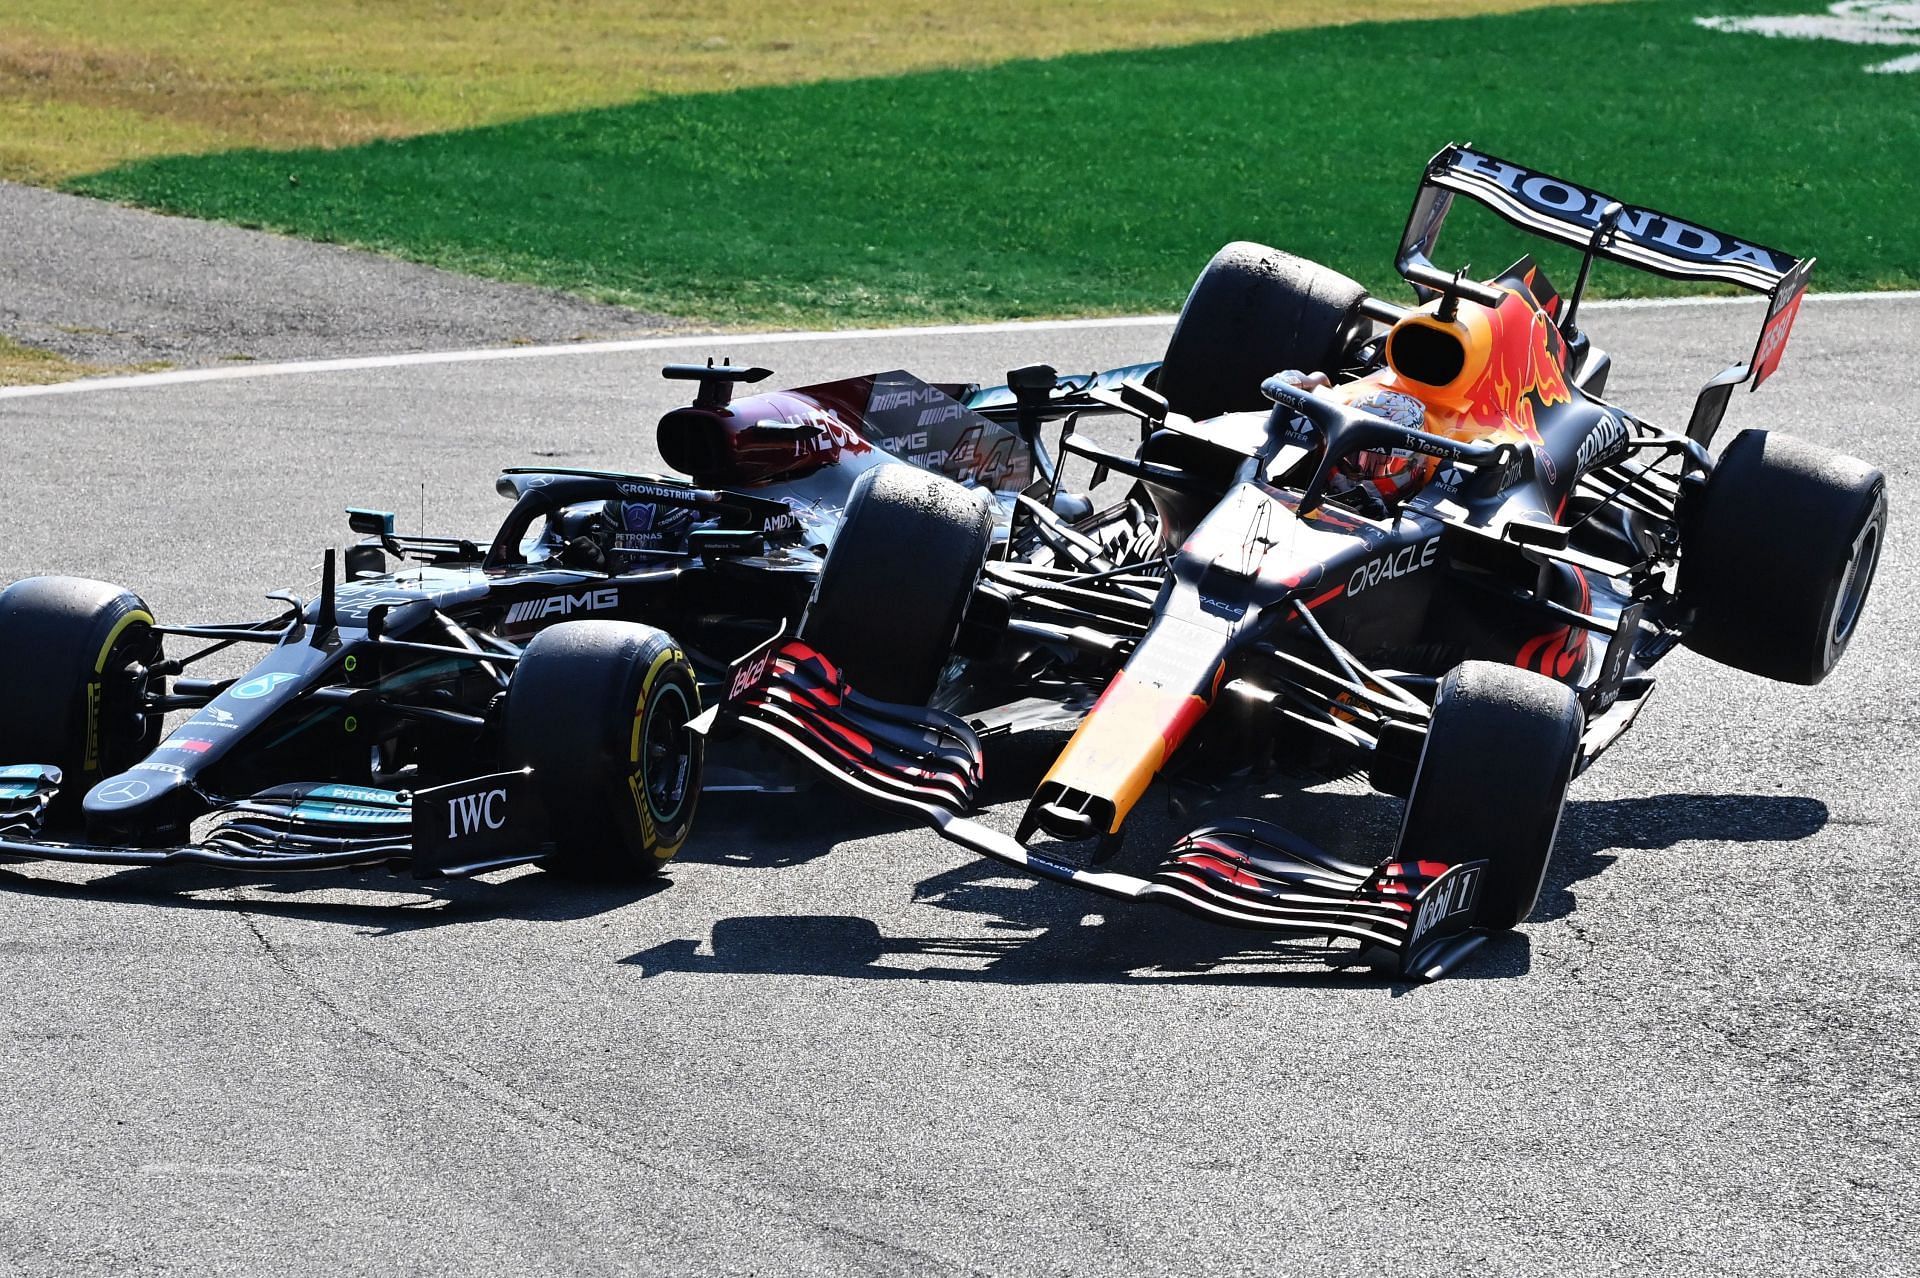 Max Verstappen clashes with Lewis Hamilton at the 2021 Italian Grand Prix in Monza. (Photo by Peter Van Egmond/Getty Images)